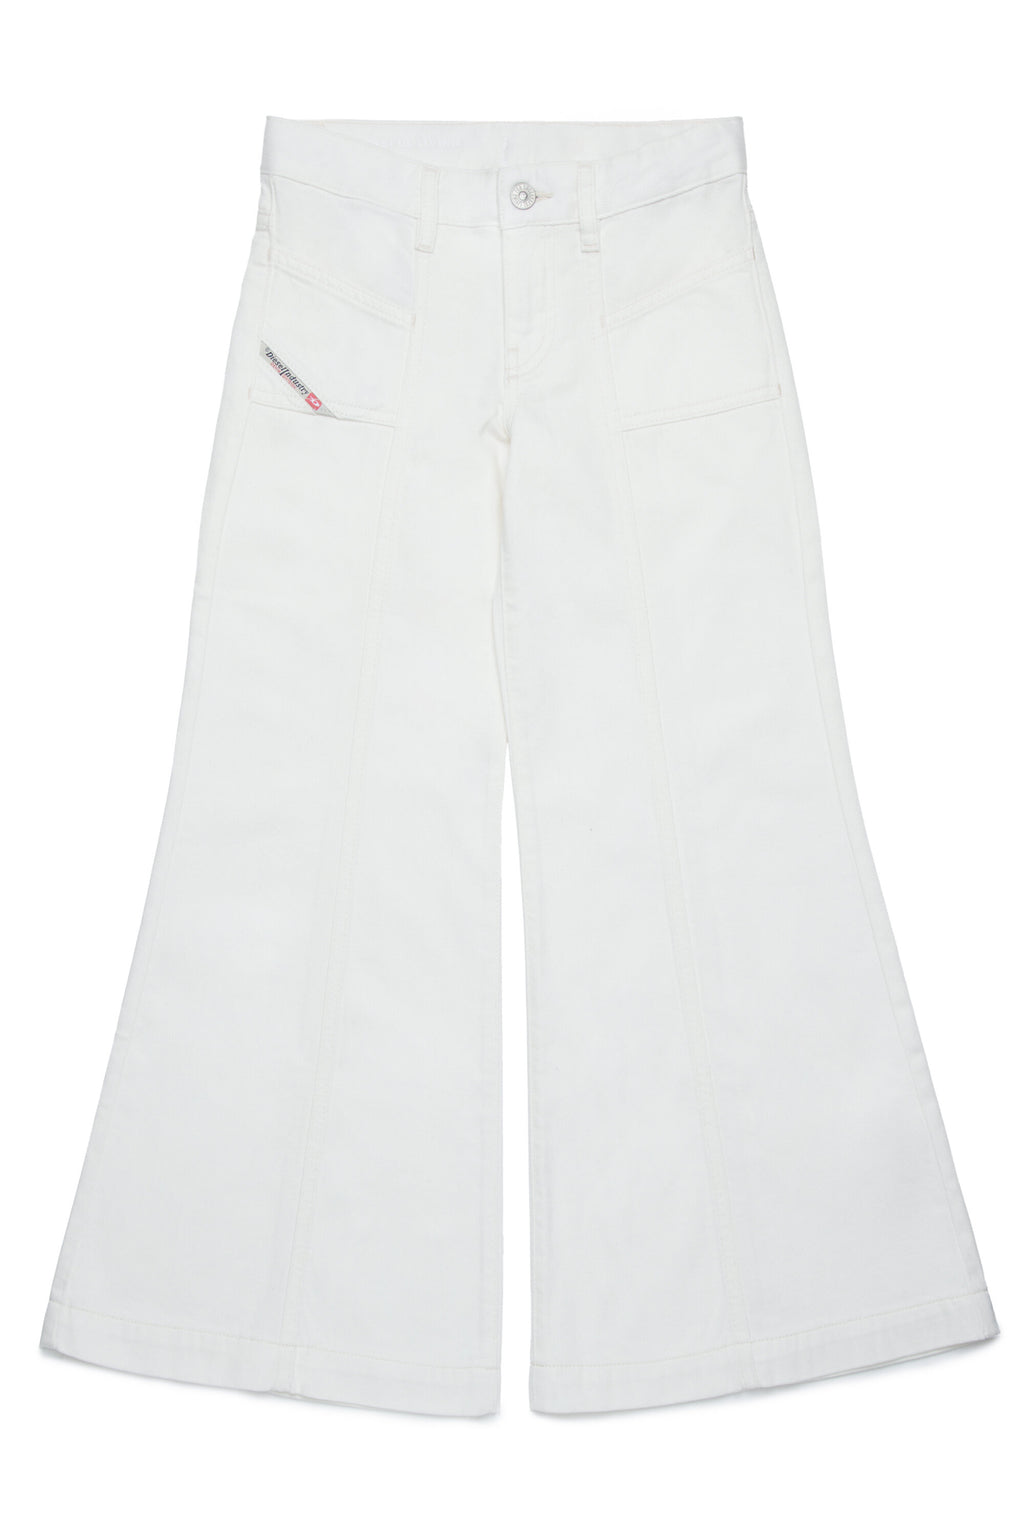 White flare jeans - D-Akii